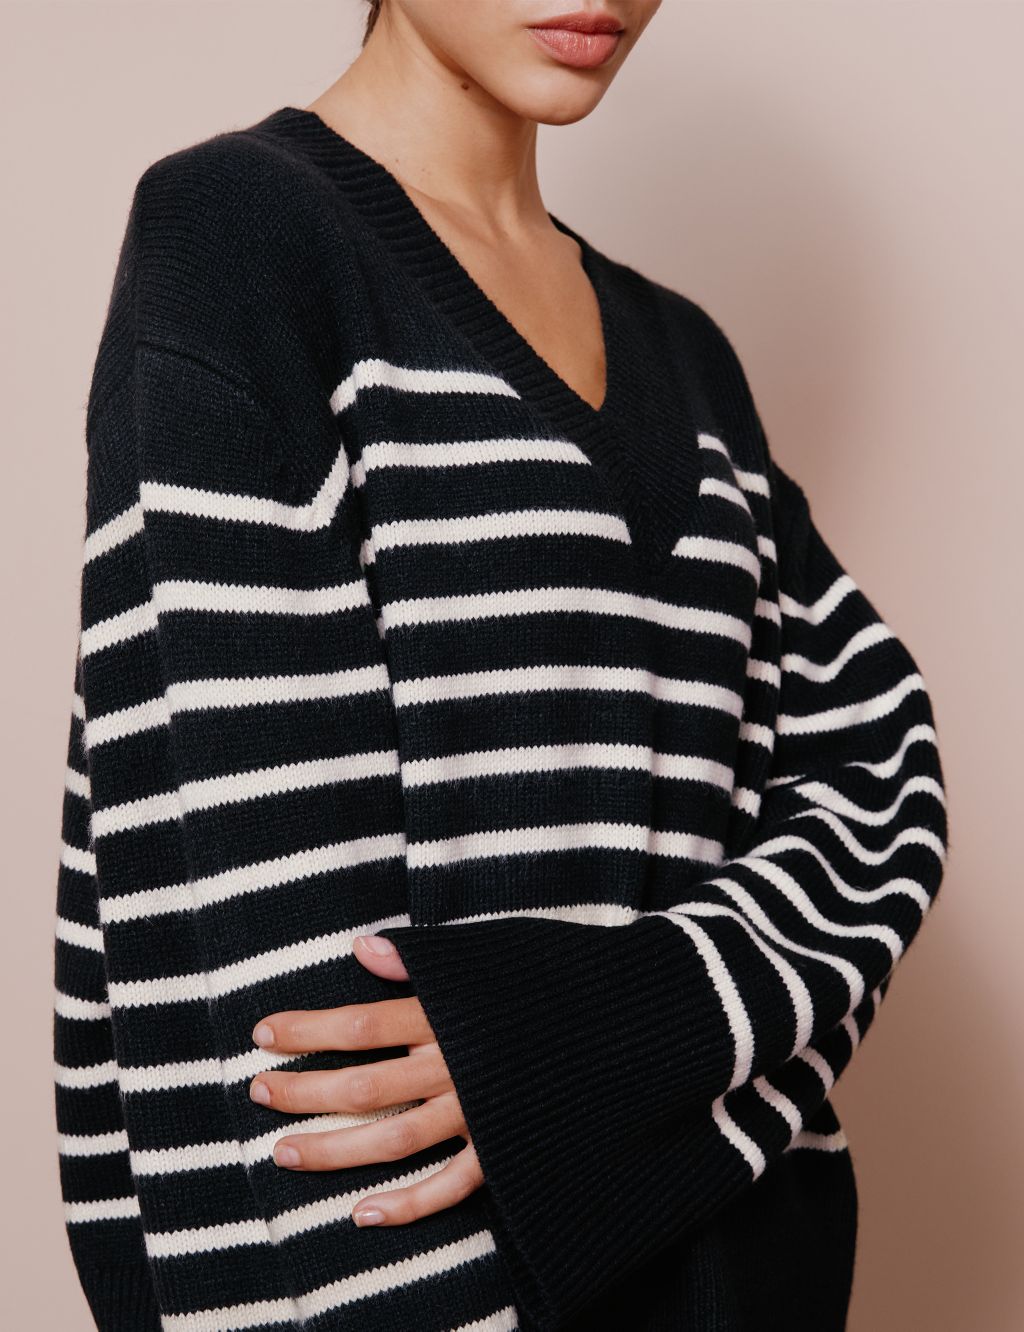 Striped V-Neck Jumper with Wool image 4